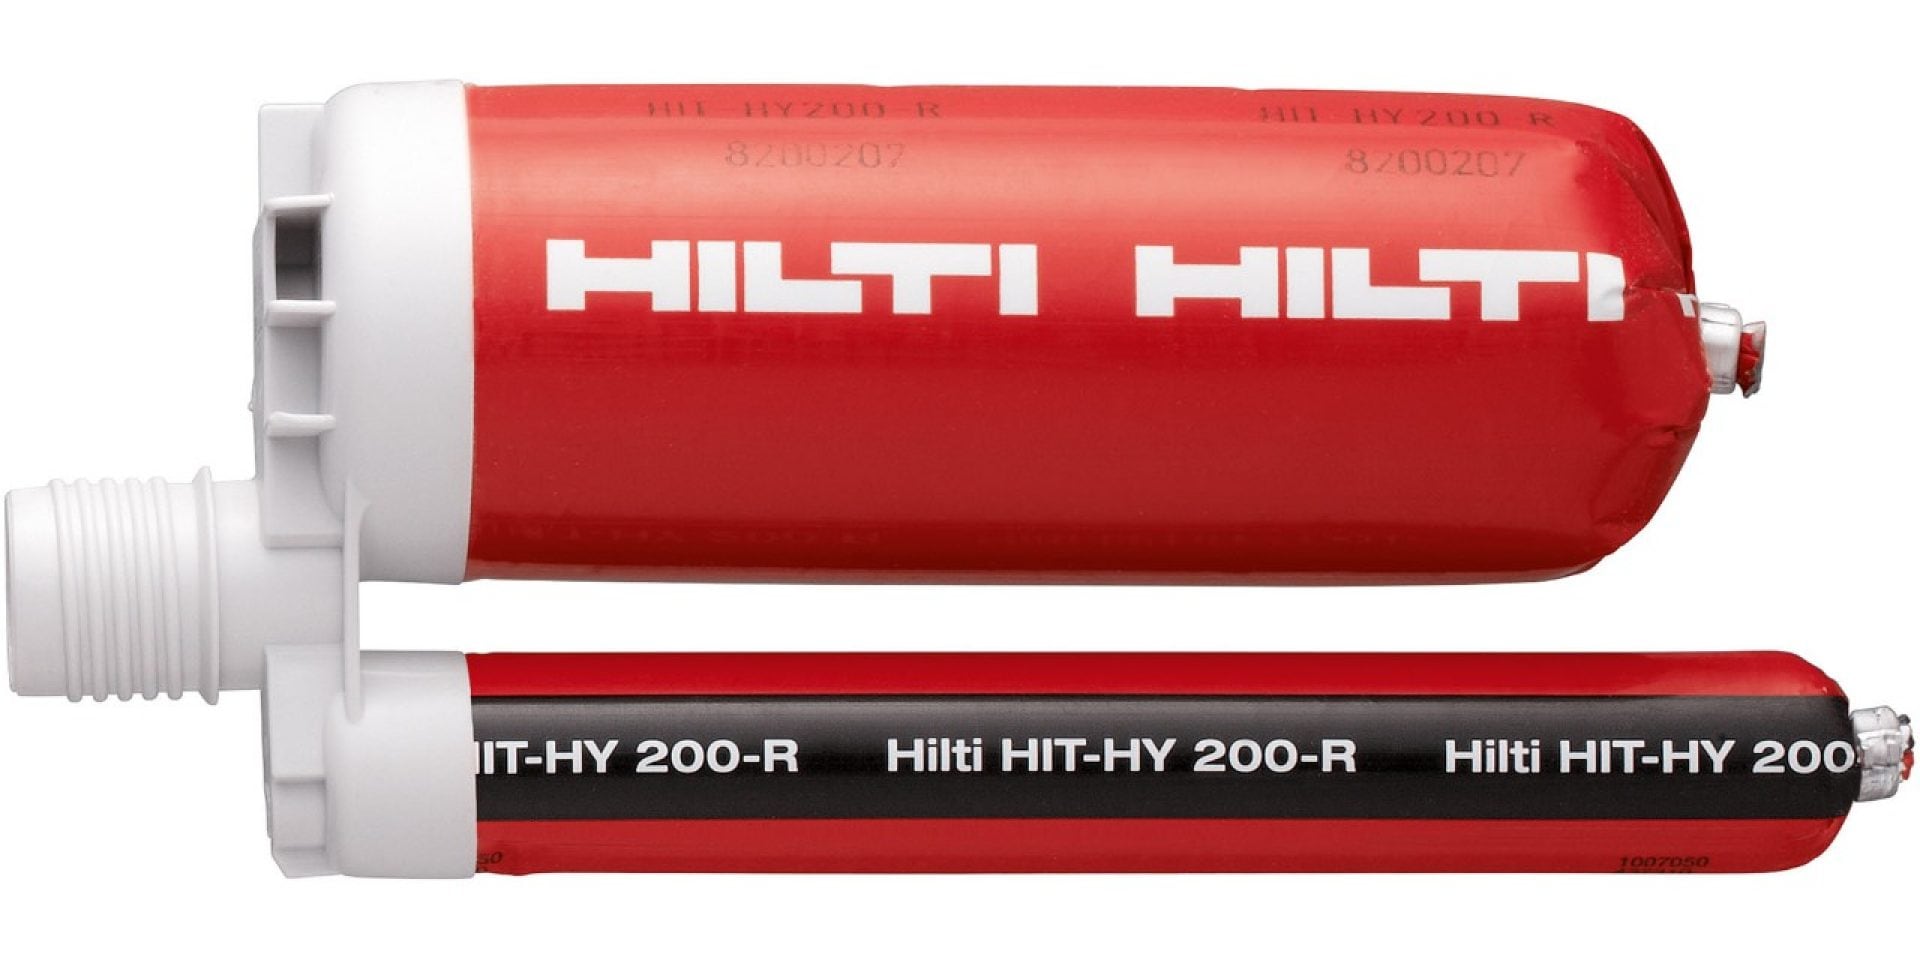 HIT-HY 200-R ultimate-performance hybrid mortar as part of the Hilti SafeSet system